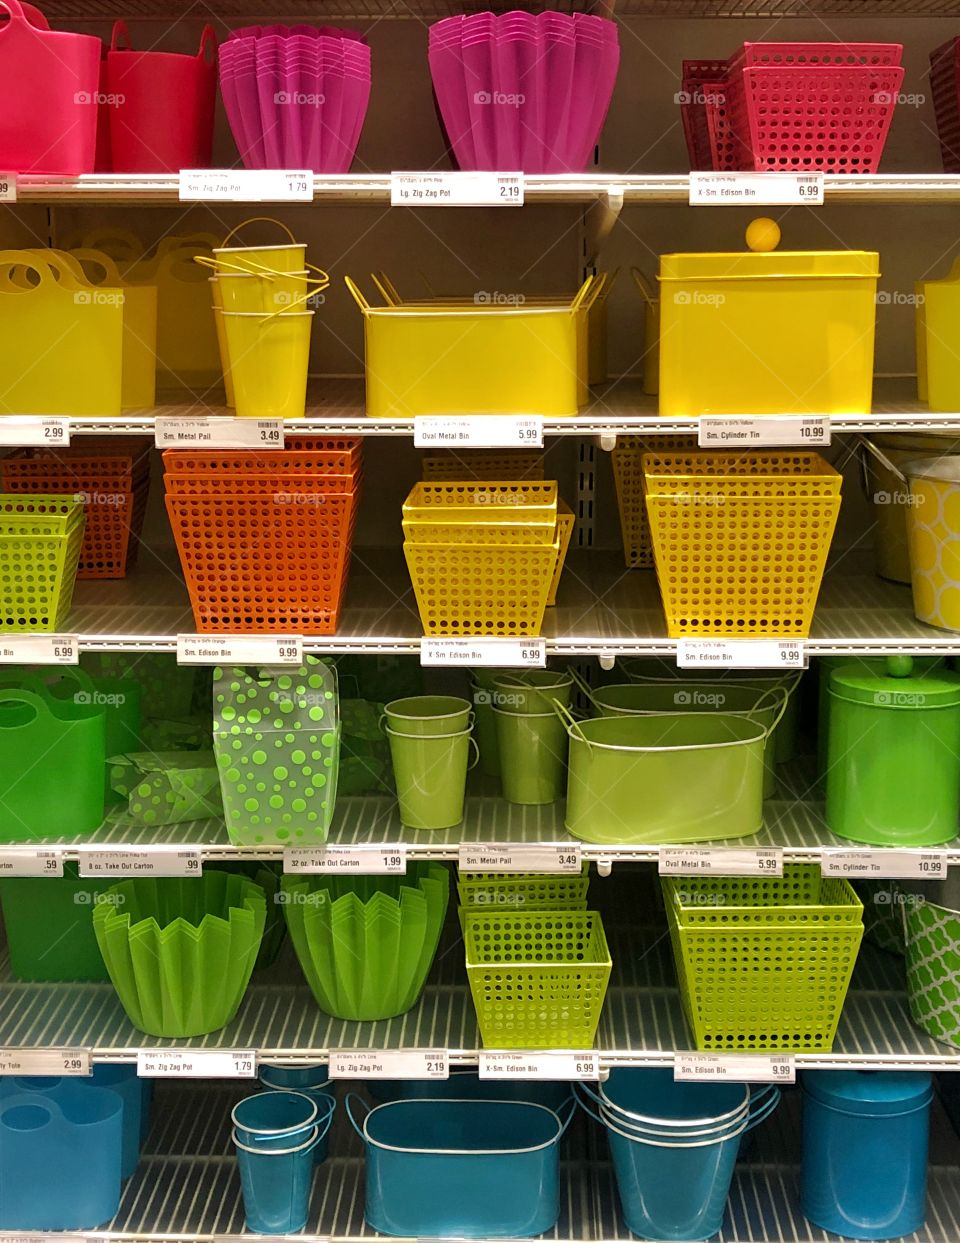 Rainbow colored containers organized neatly